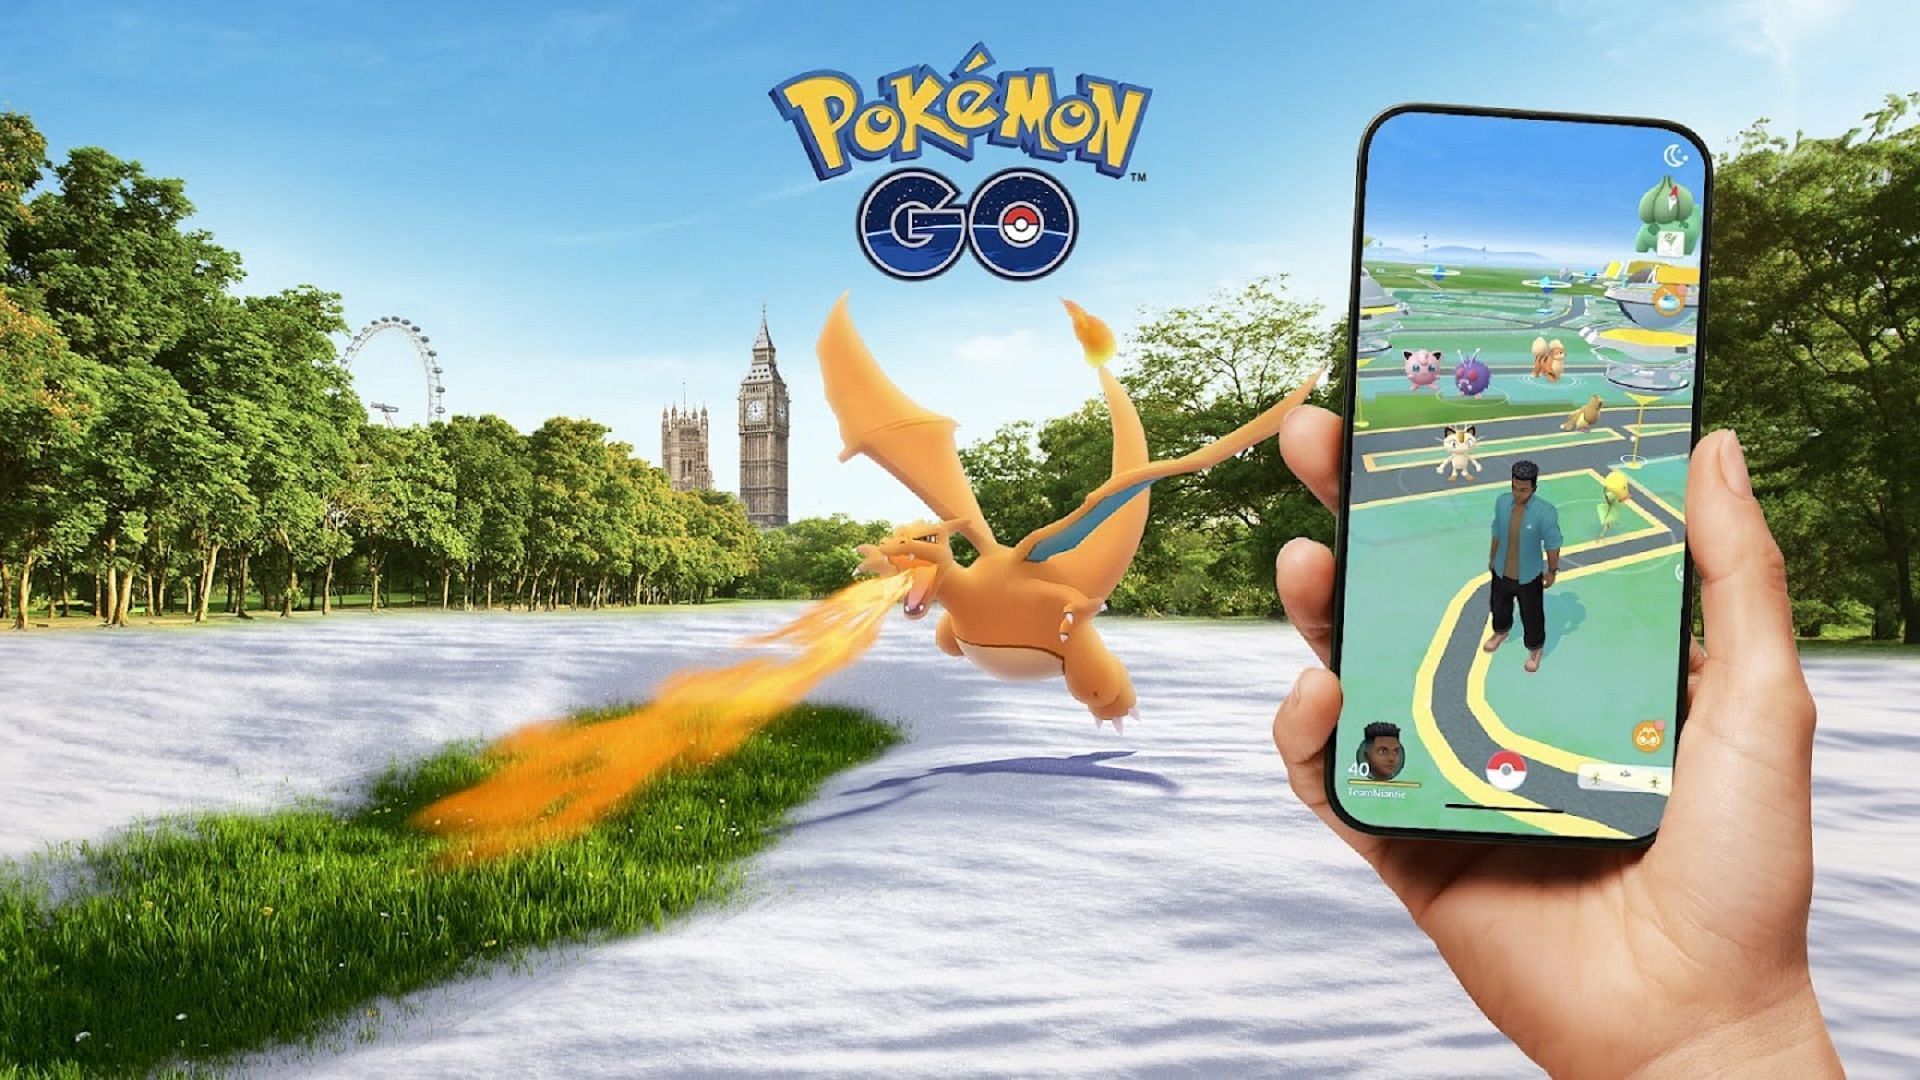 Pokemon GO still has &quot;game breaking issues&quot; nearly a decade after launch, and players aren